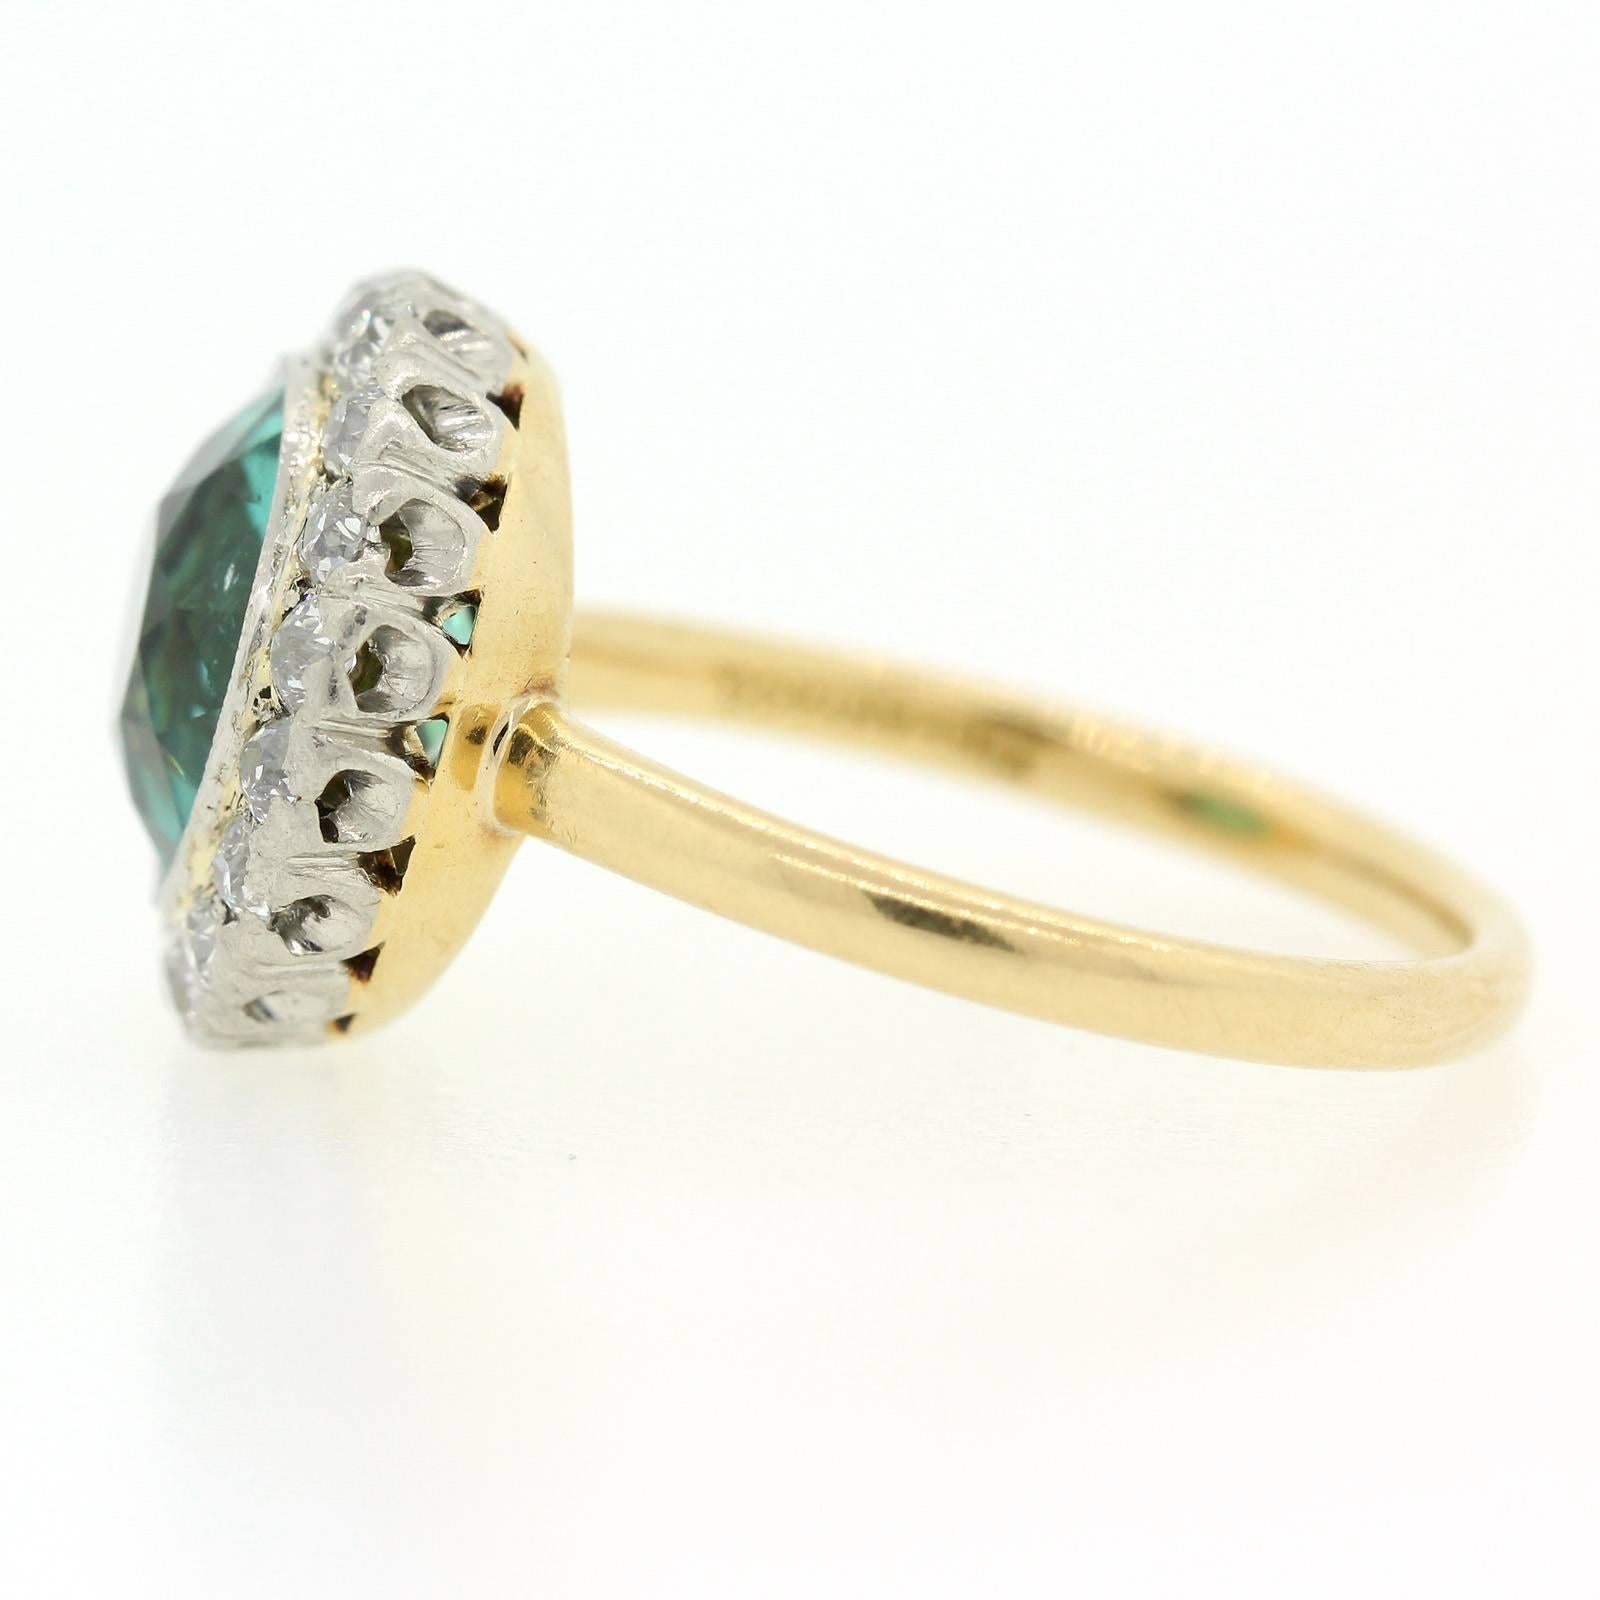 A beauty from the past this coveted Edwardian Tiffany and Co. platinum and 18KT yellow gold ring featuring a gorgeous A.G.L. certified Blue-Green round cut Tourmaline weighing approx. 3.20 carats.  The setting is accented with a one carat ten Old